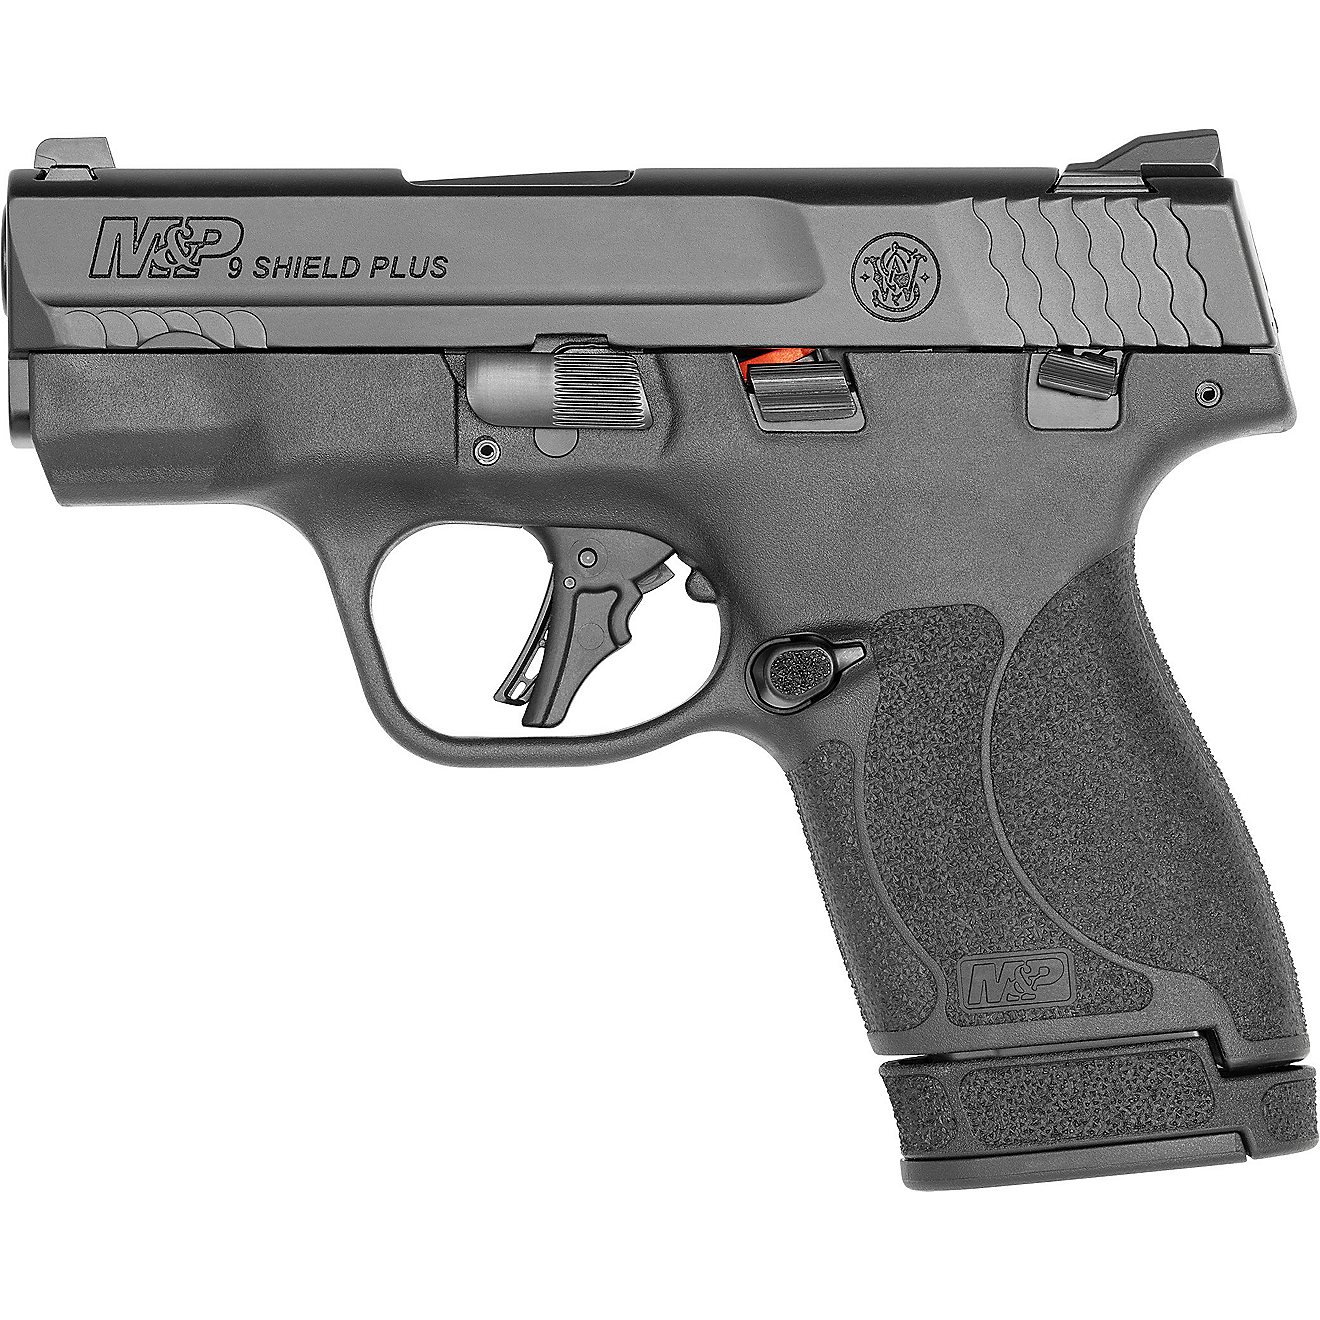 Smith and Wesson M&P9 Shield Plus TS 9mm Pistol | Academy